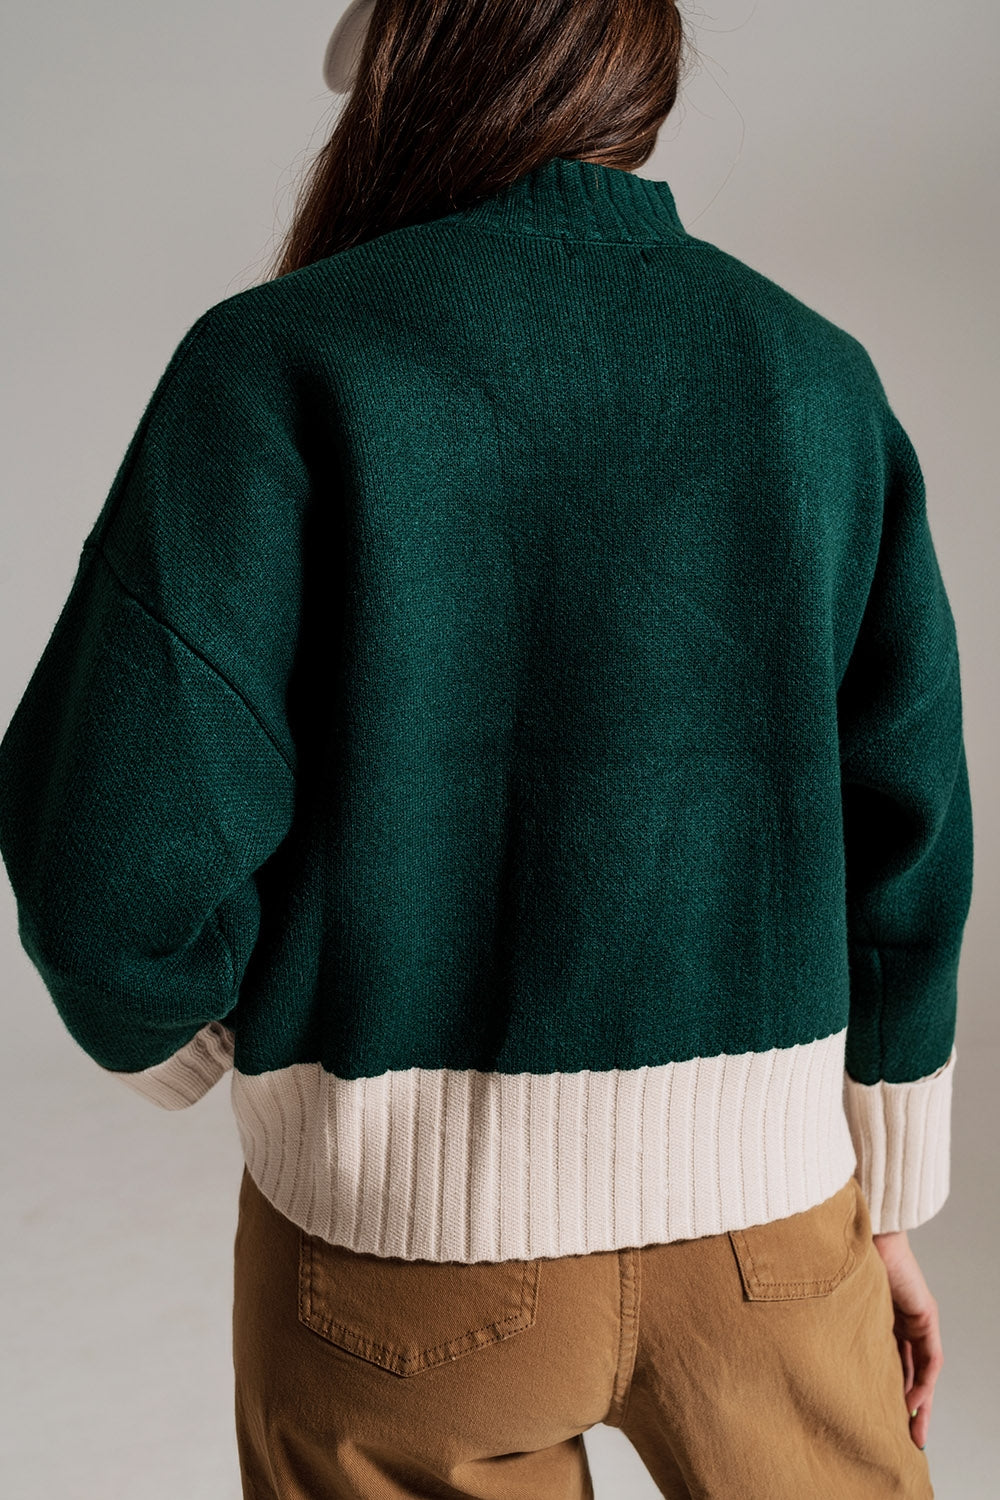 Green jumper with white ribbed cuffs and hem - Szua Store